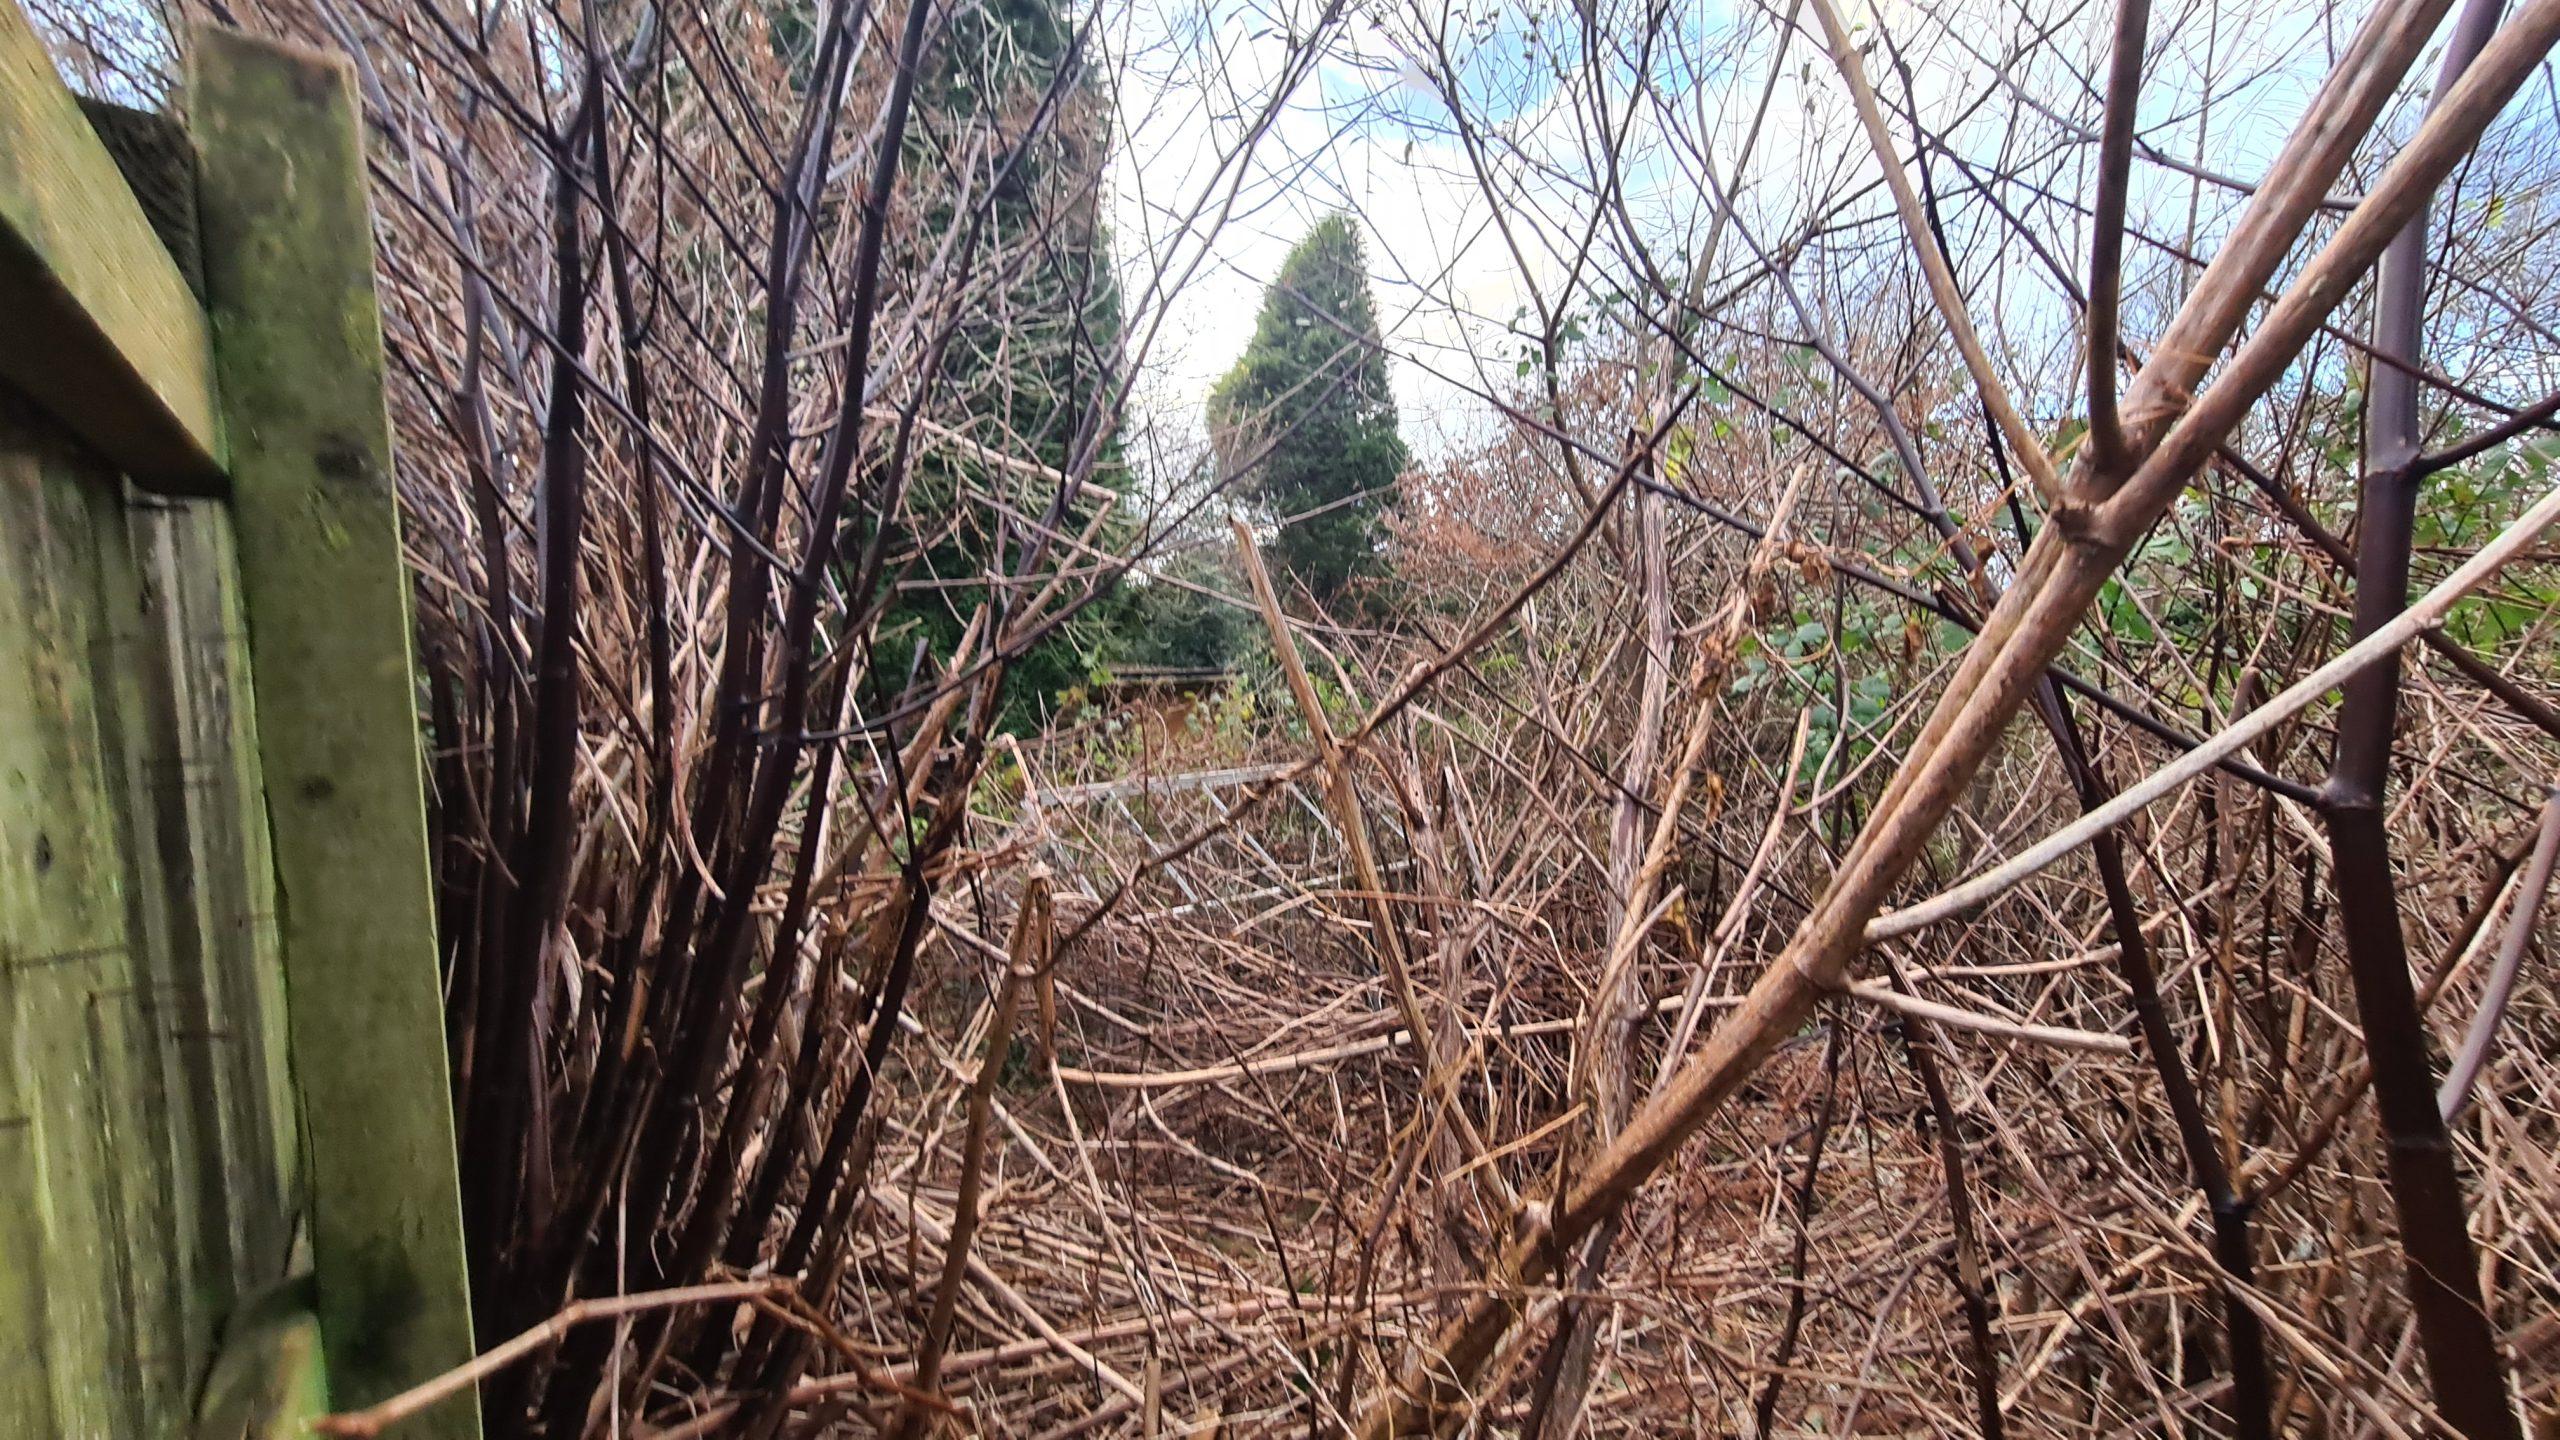 Factors to consider when removing Japanese knotweed is the area it covers and how advanced it is